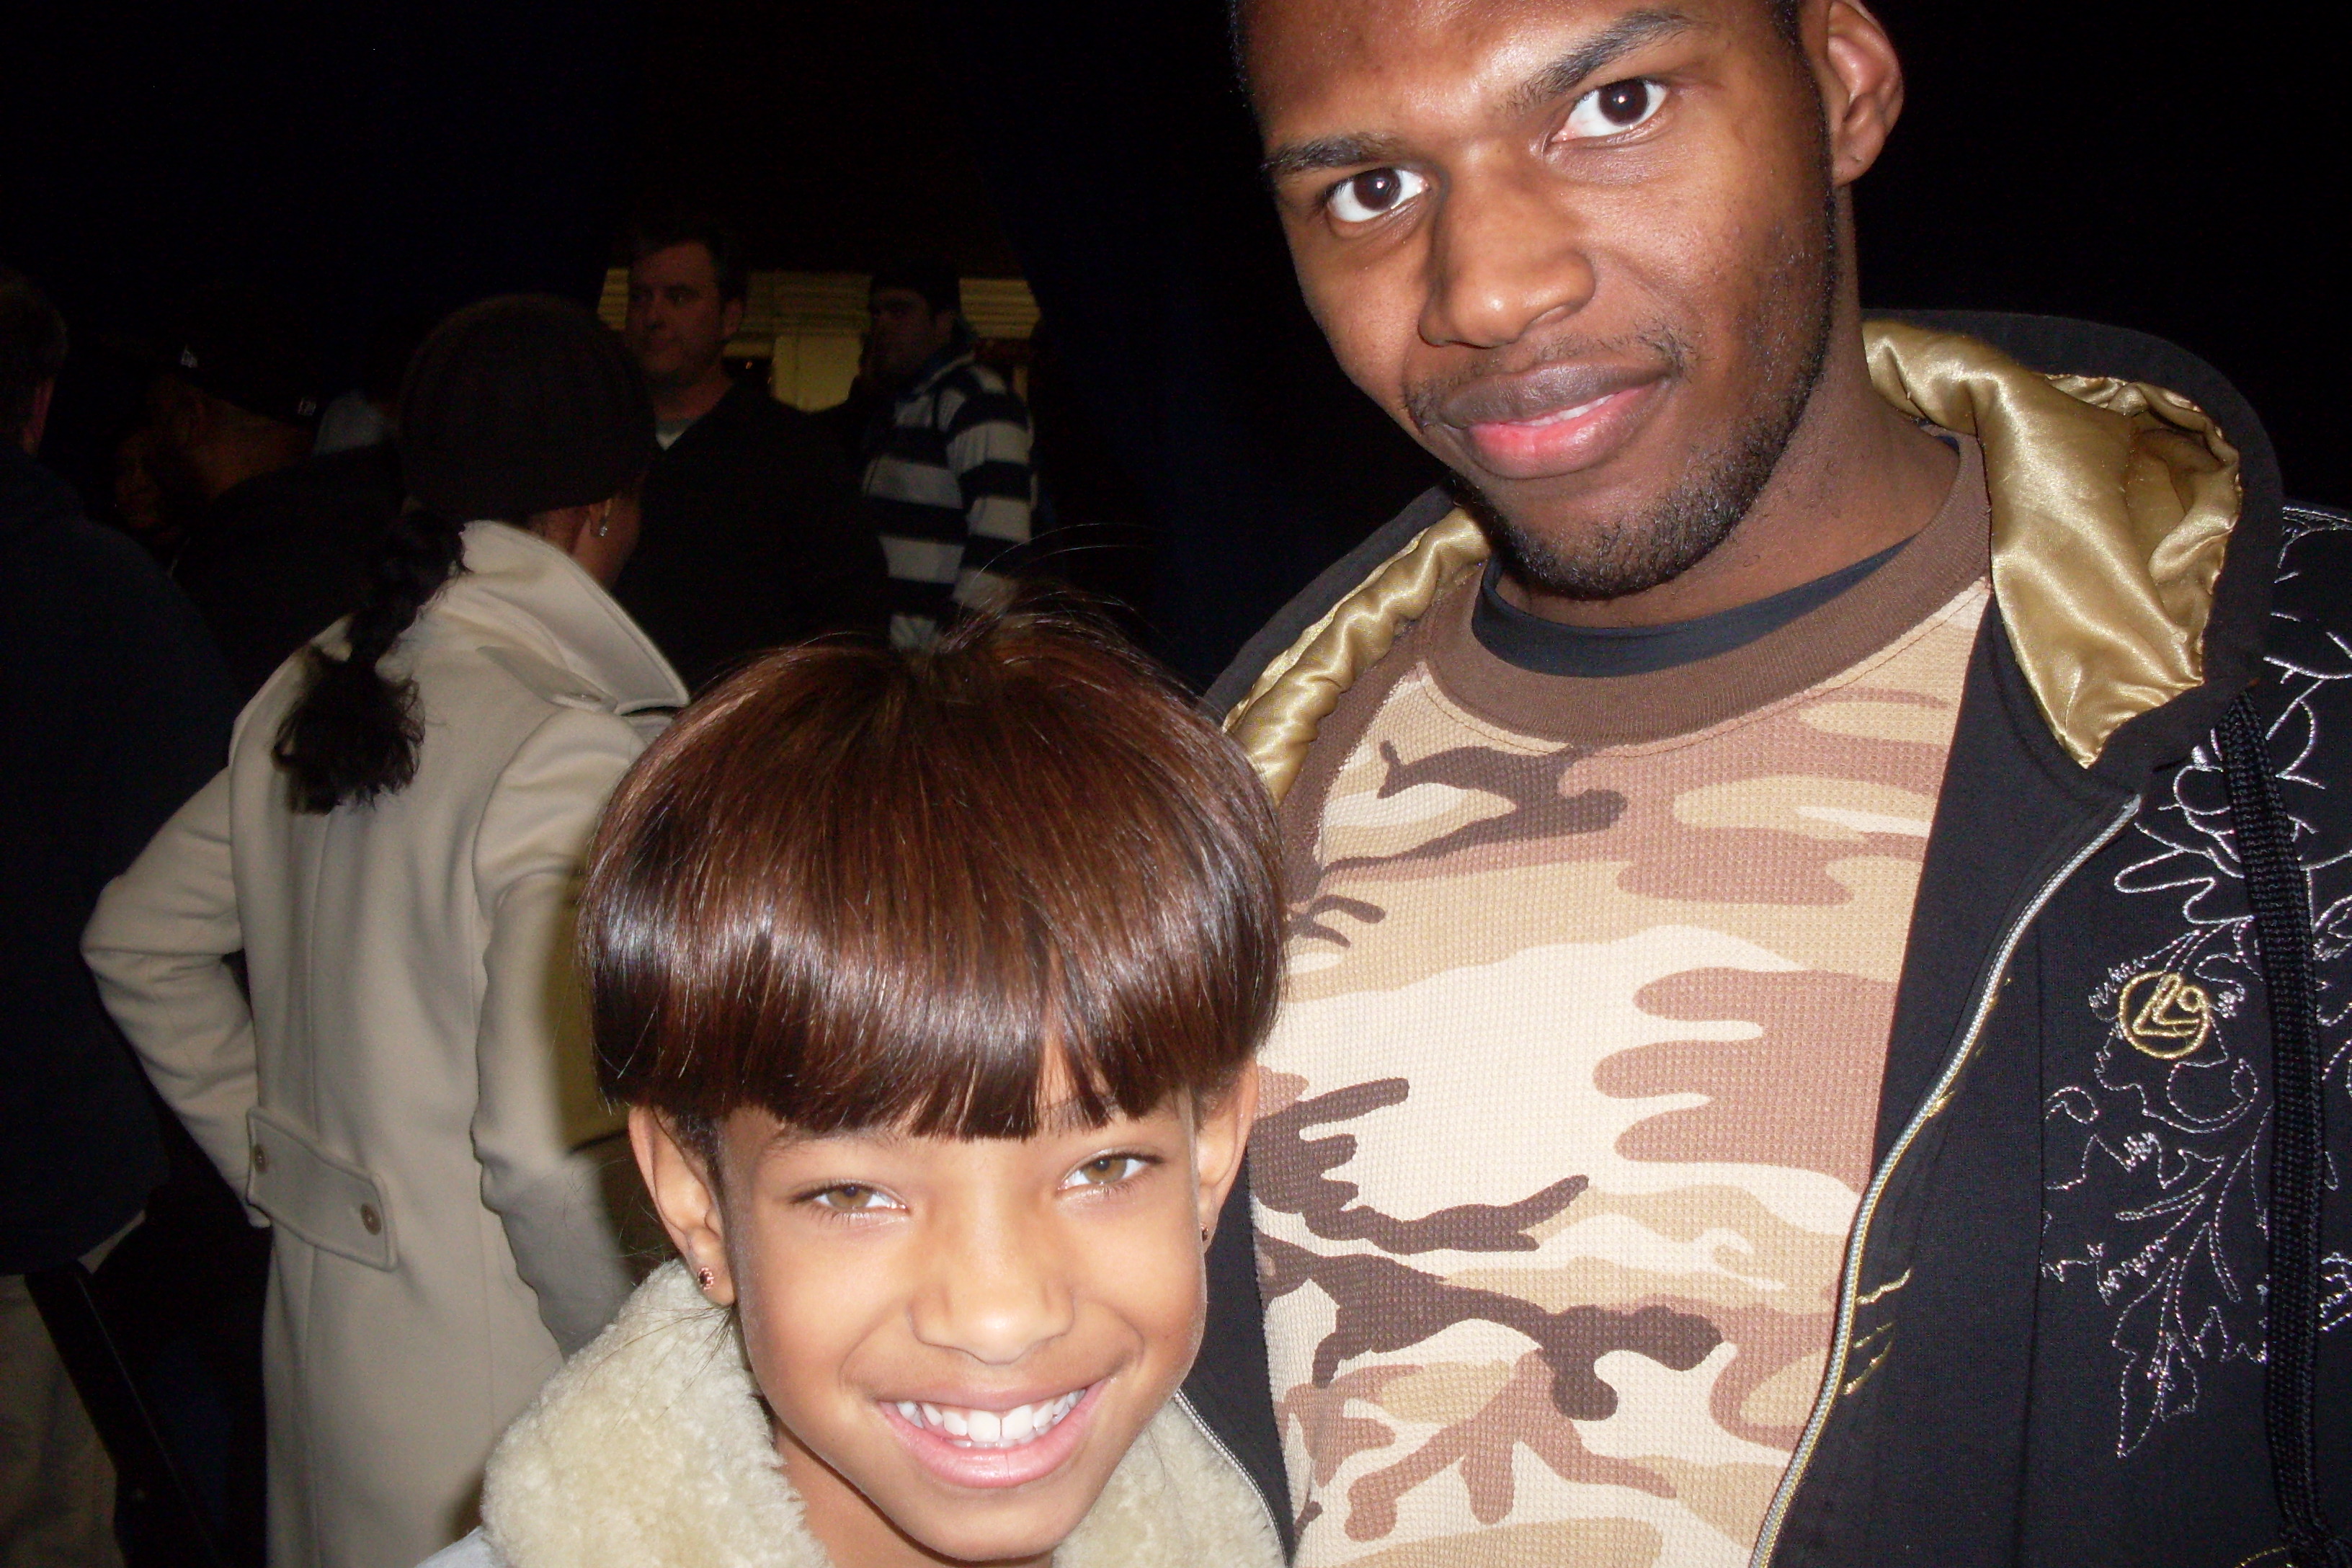 Allen Holloway and Willow Smith on set of Men in Black 3